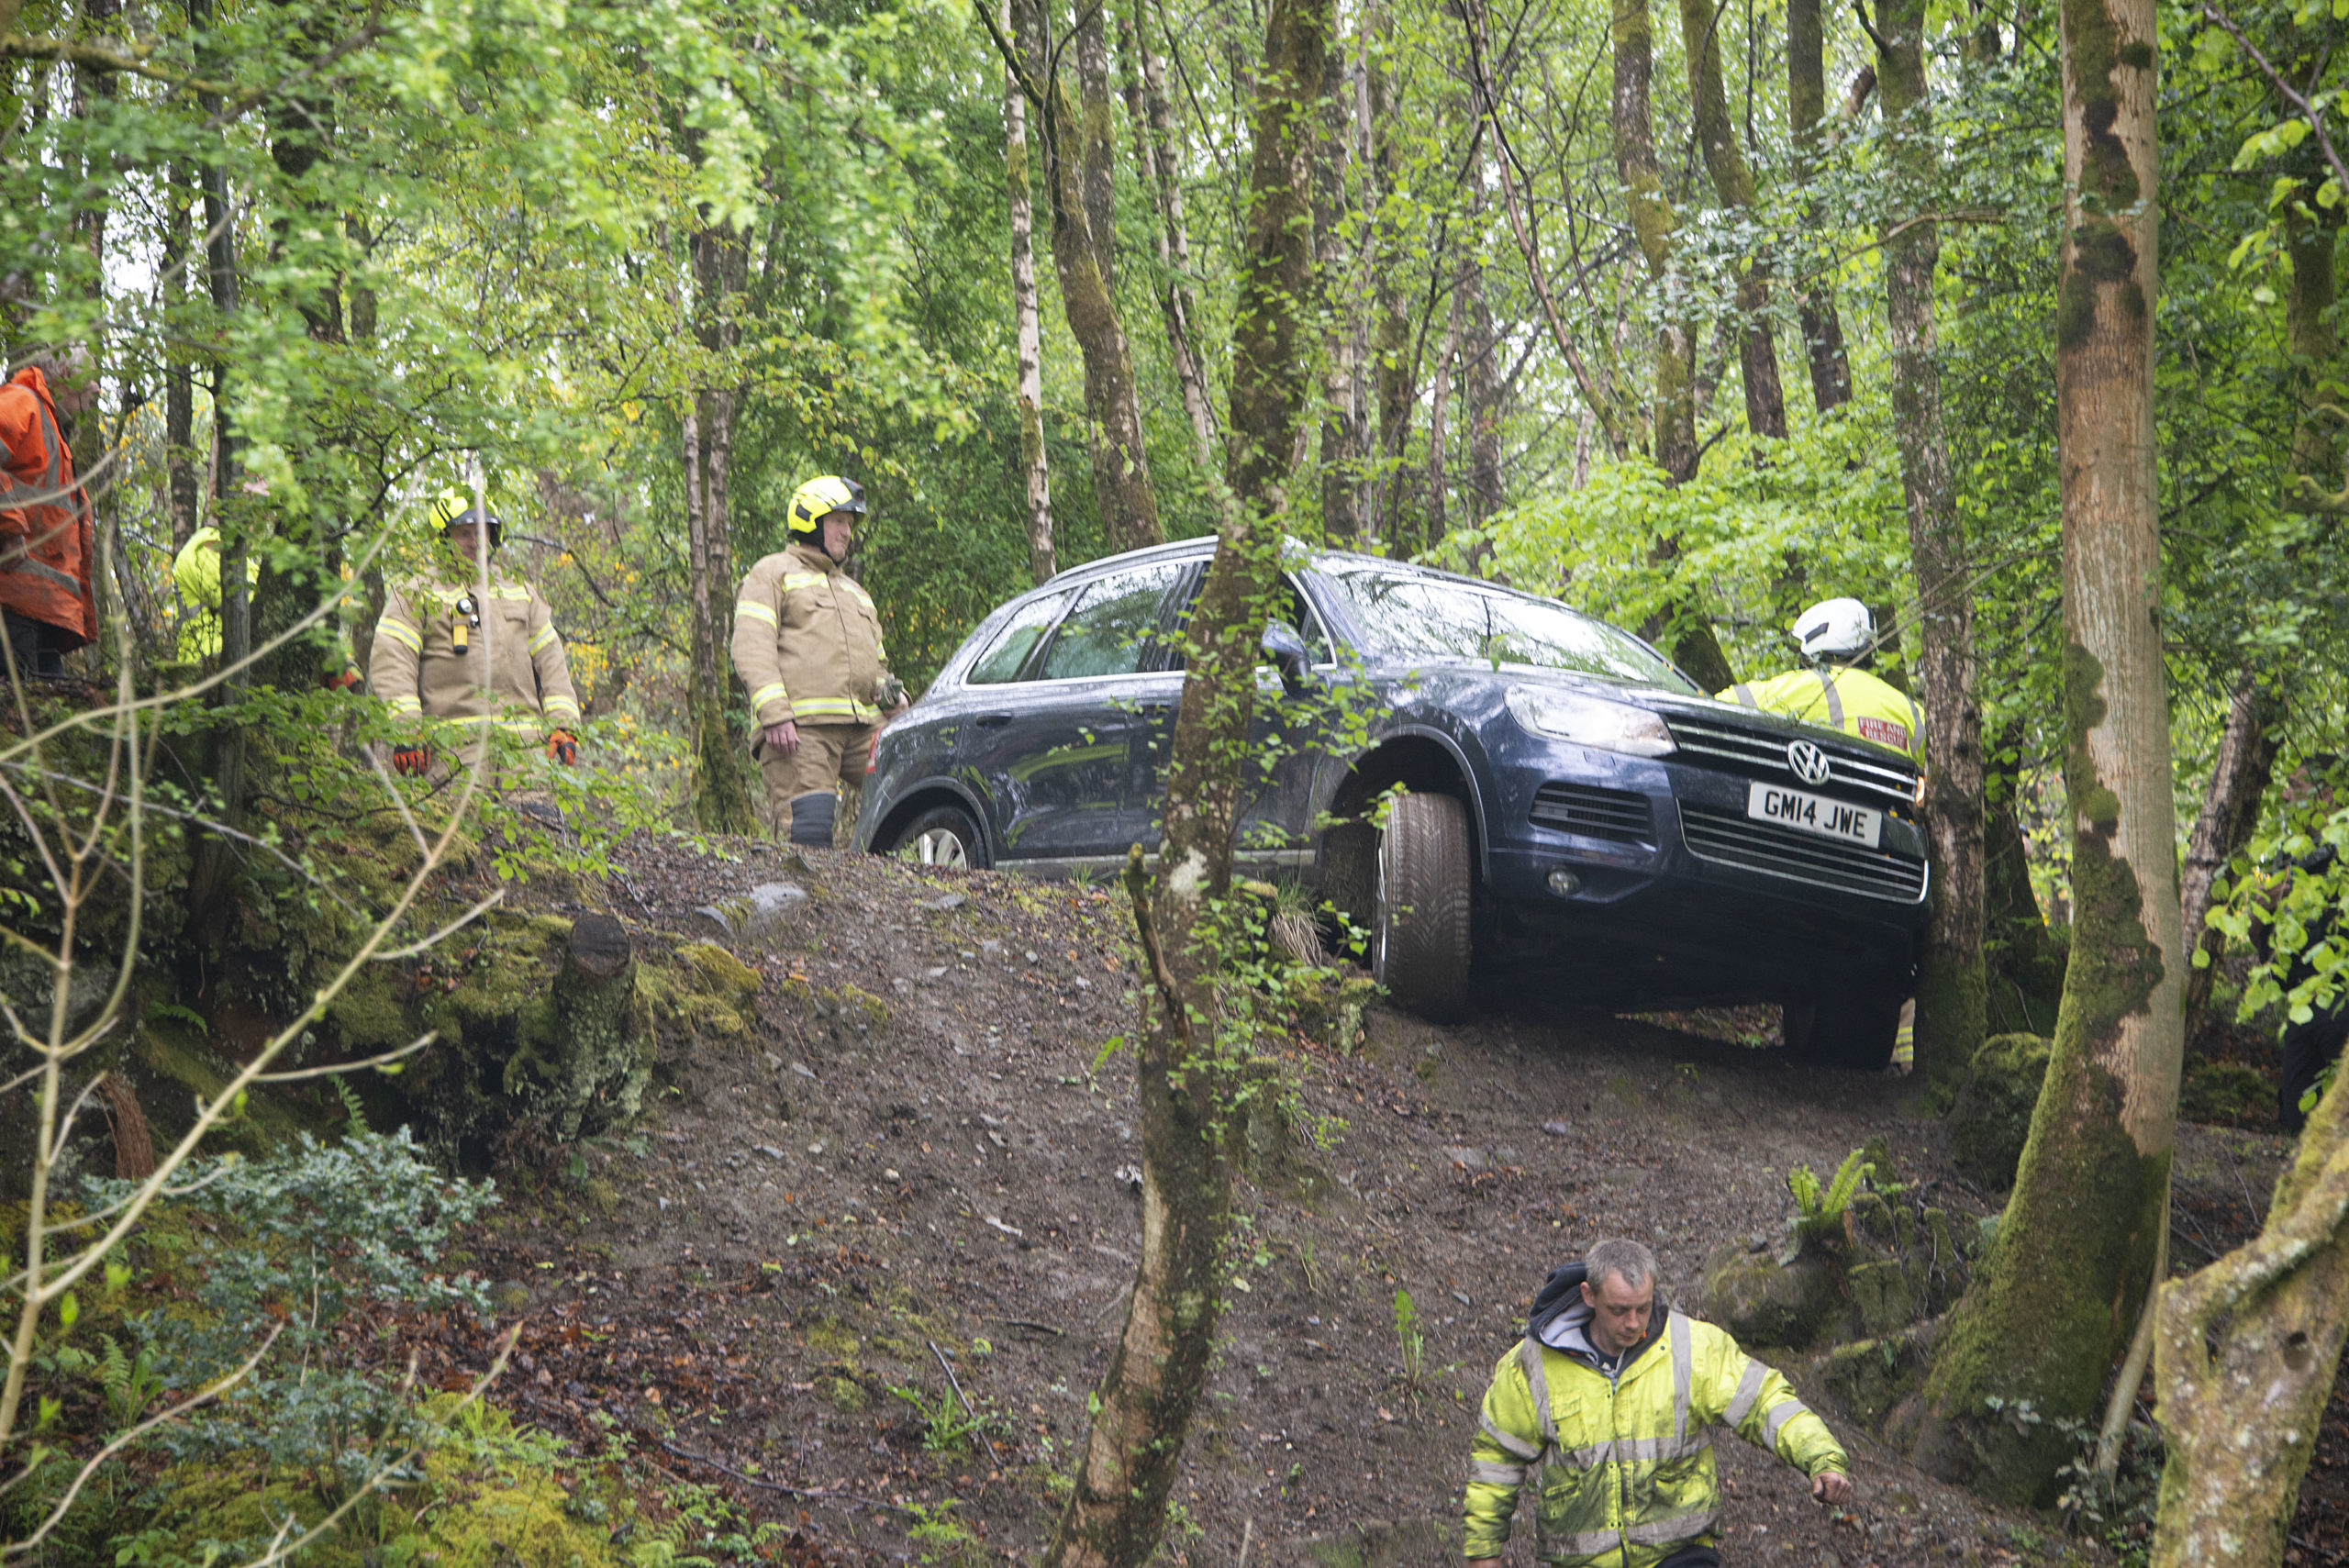 Volkswagen 4x4 hangs over the edge of a 15 foot drop in Fort William after the driver tried to take his car up a steep and winding Forestry Commission footpath.